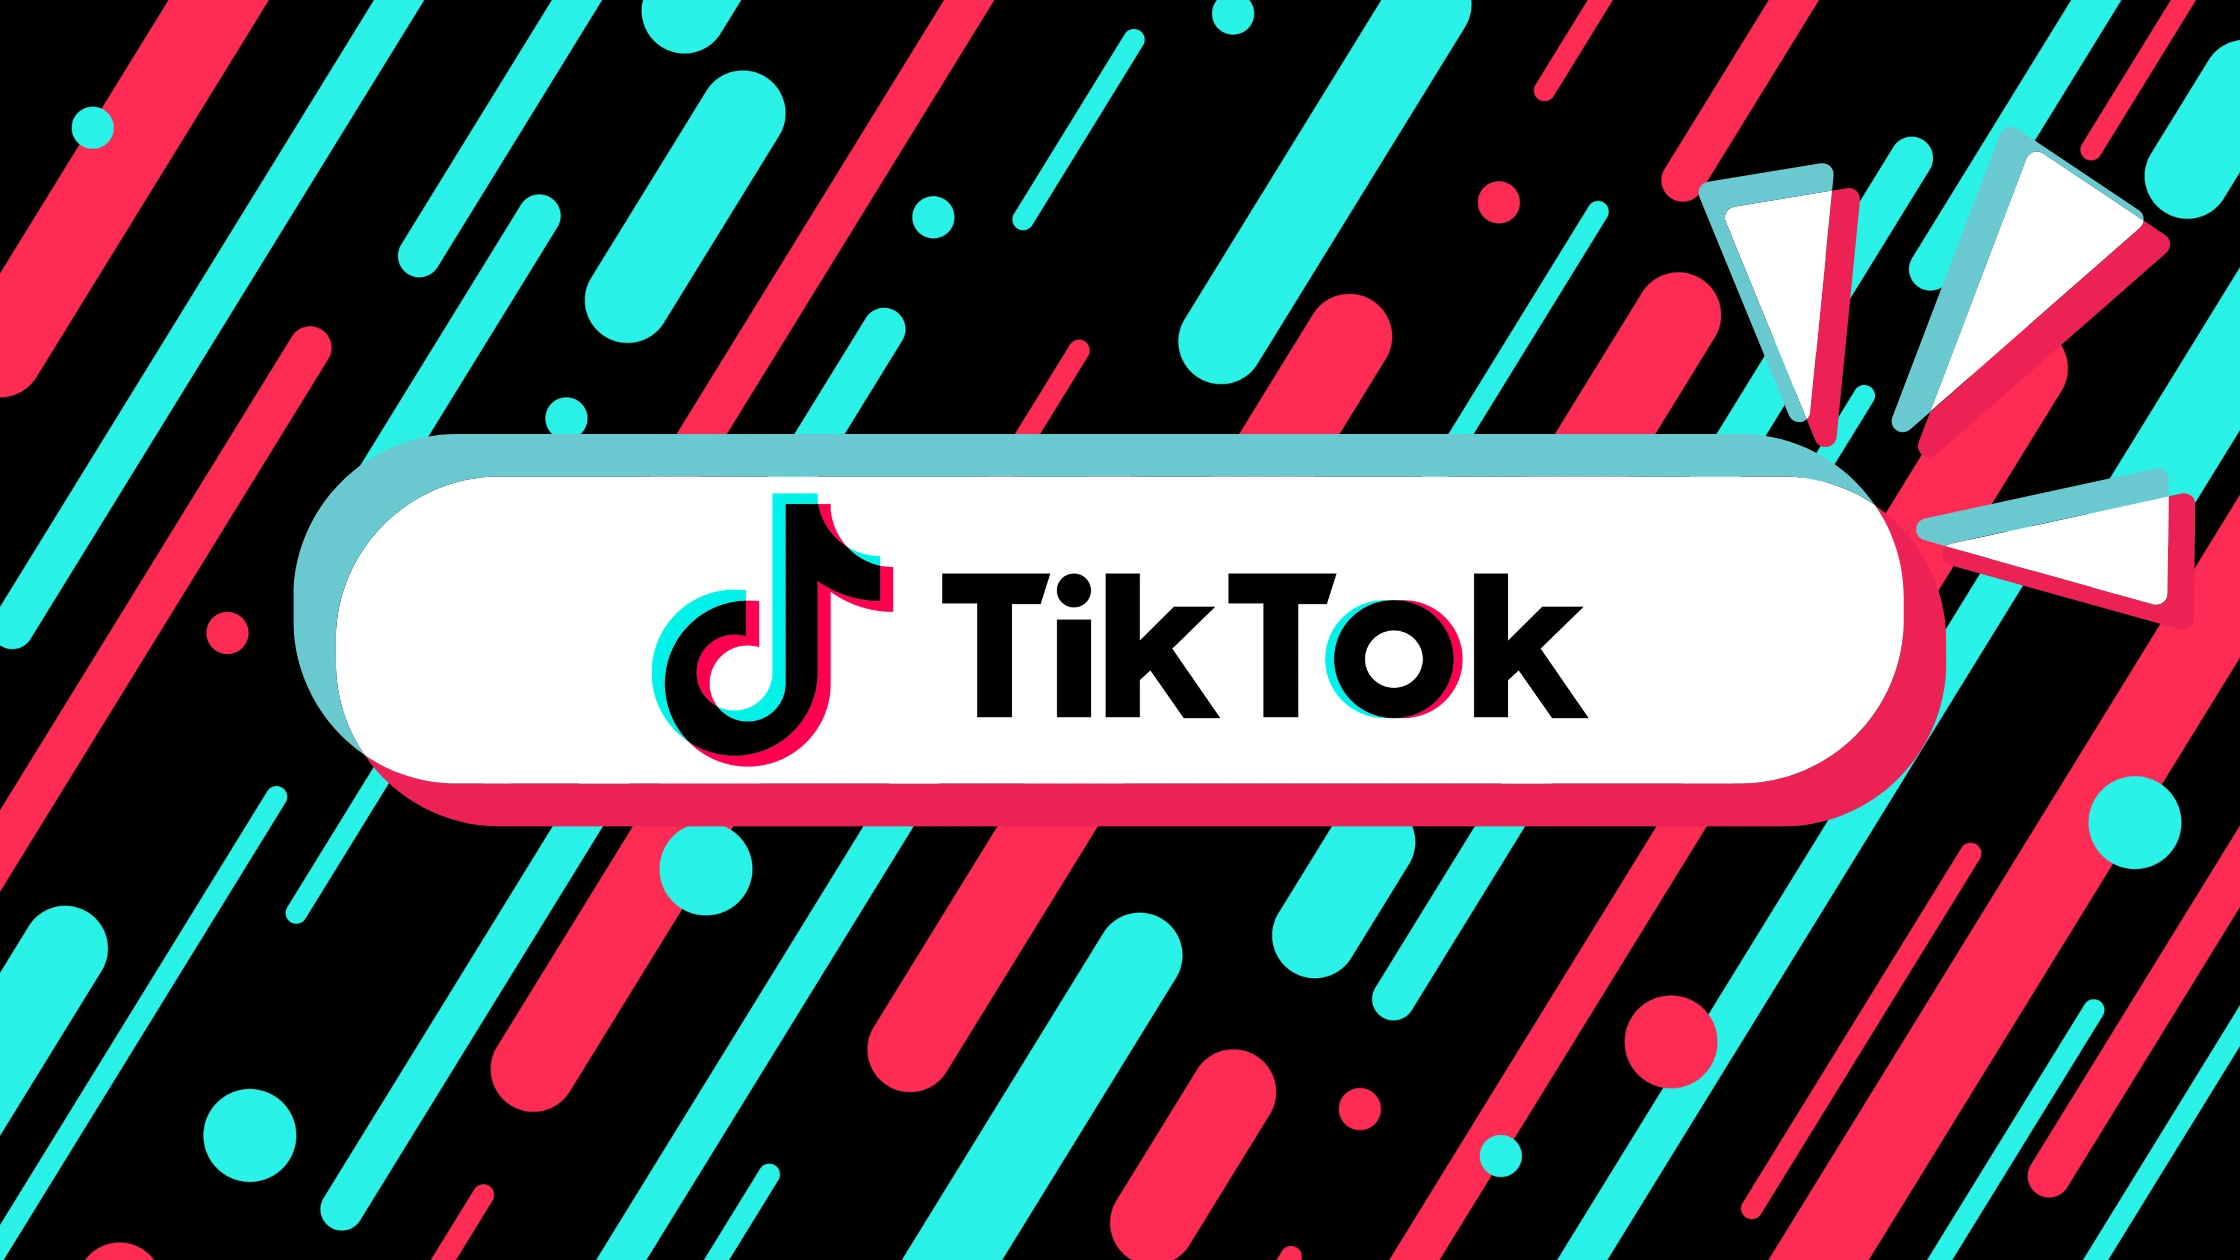 What Font Does Tiktok Use?